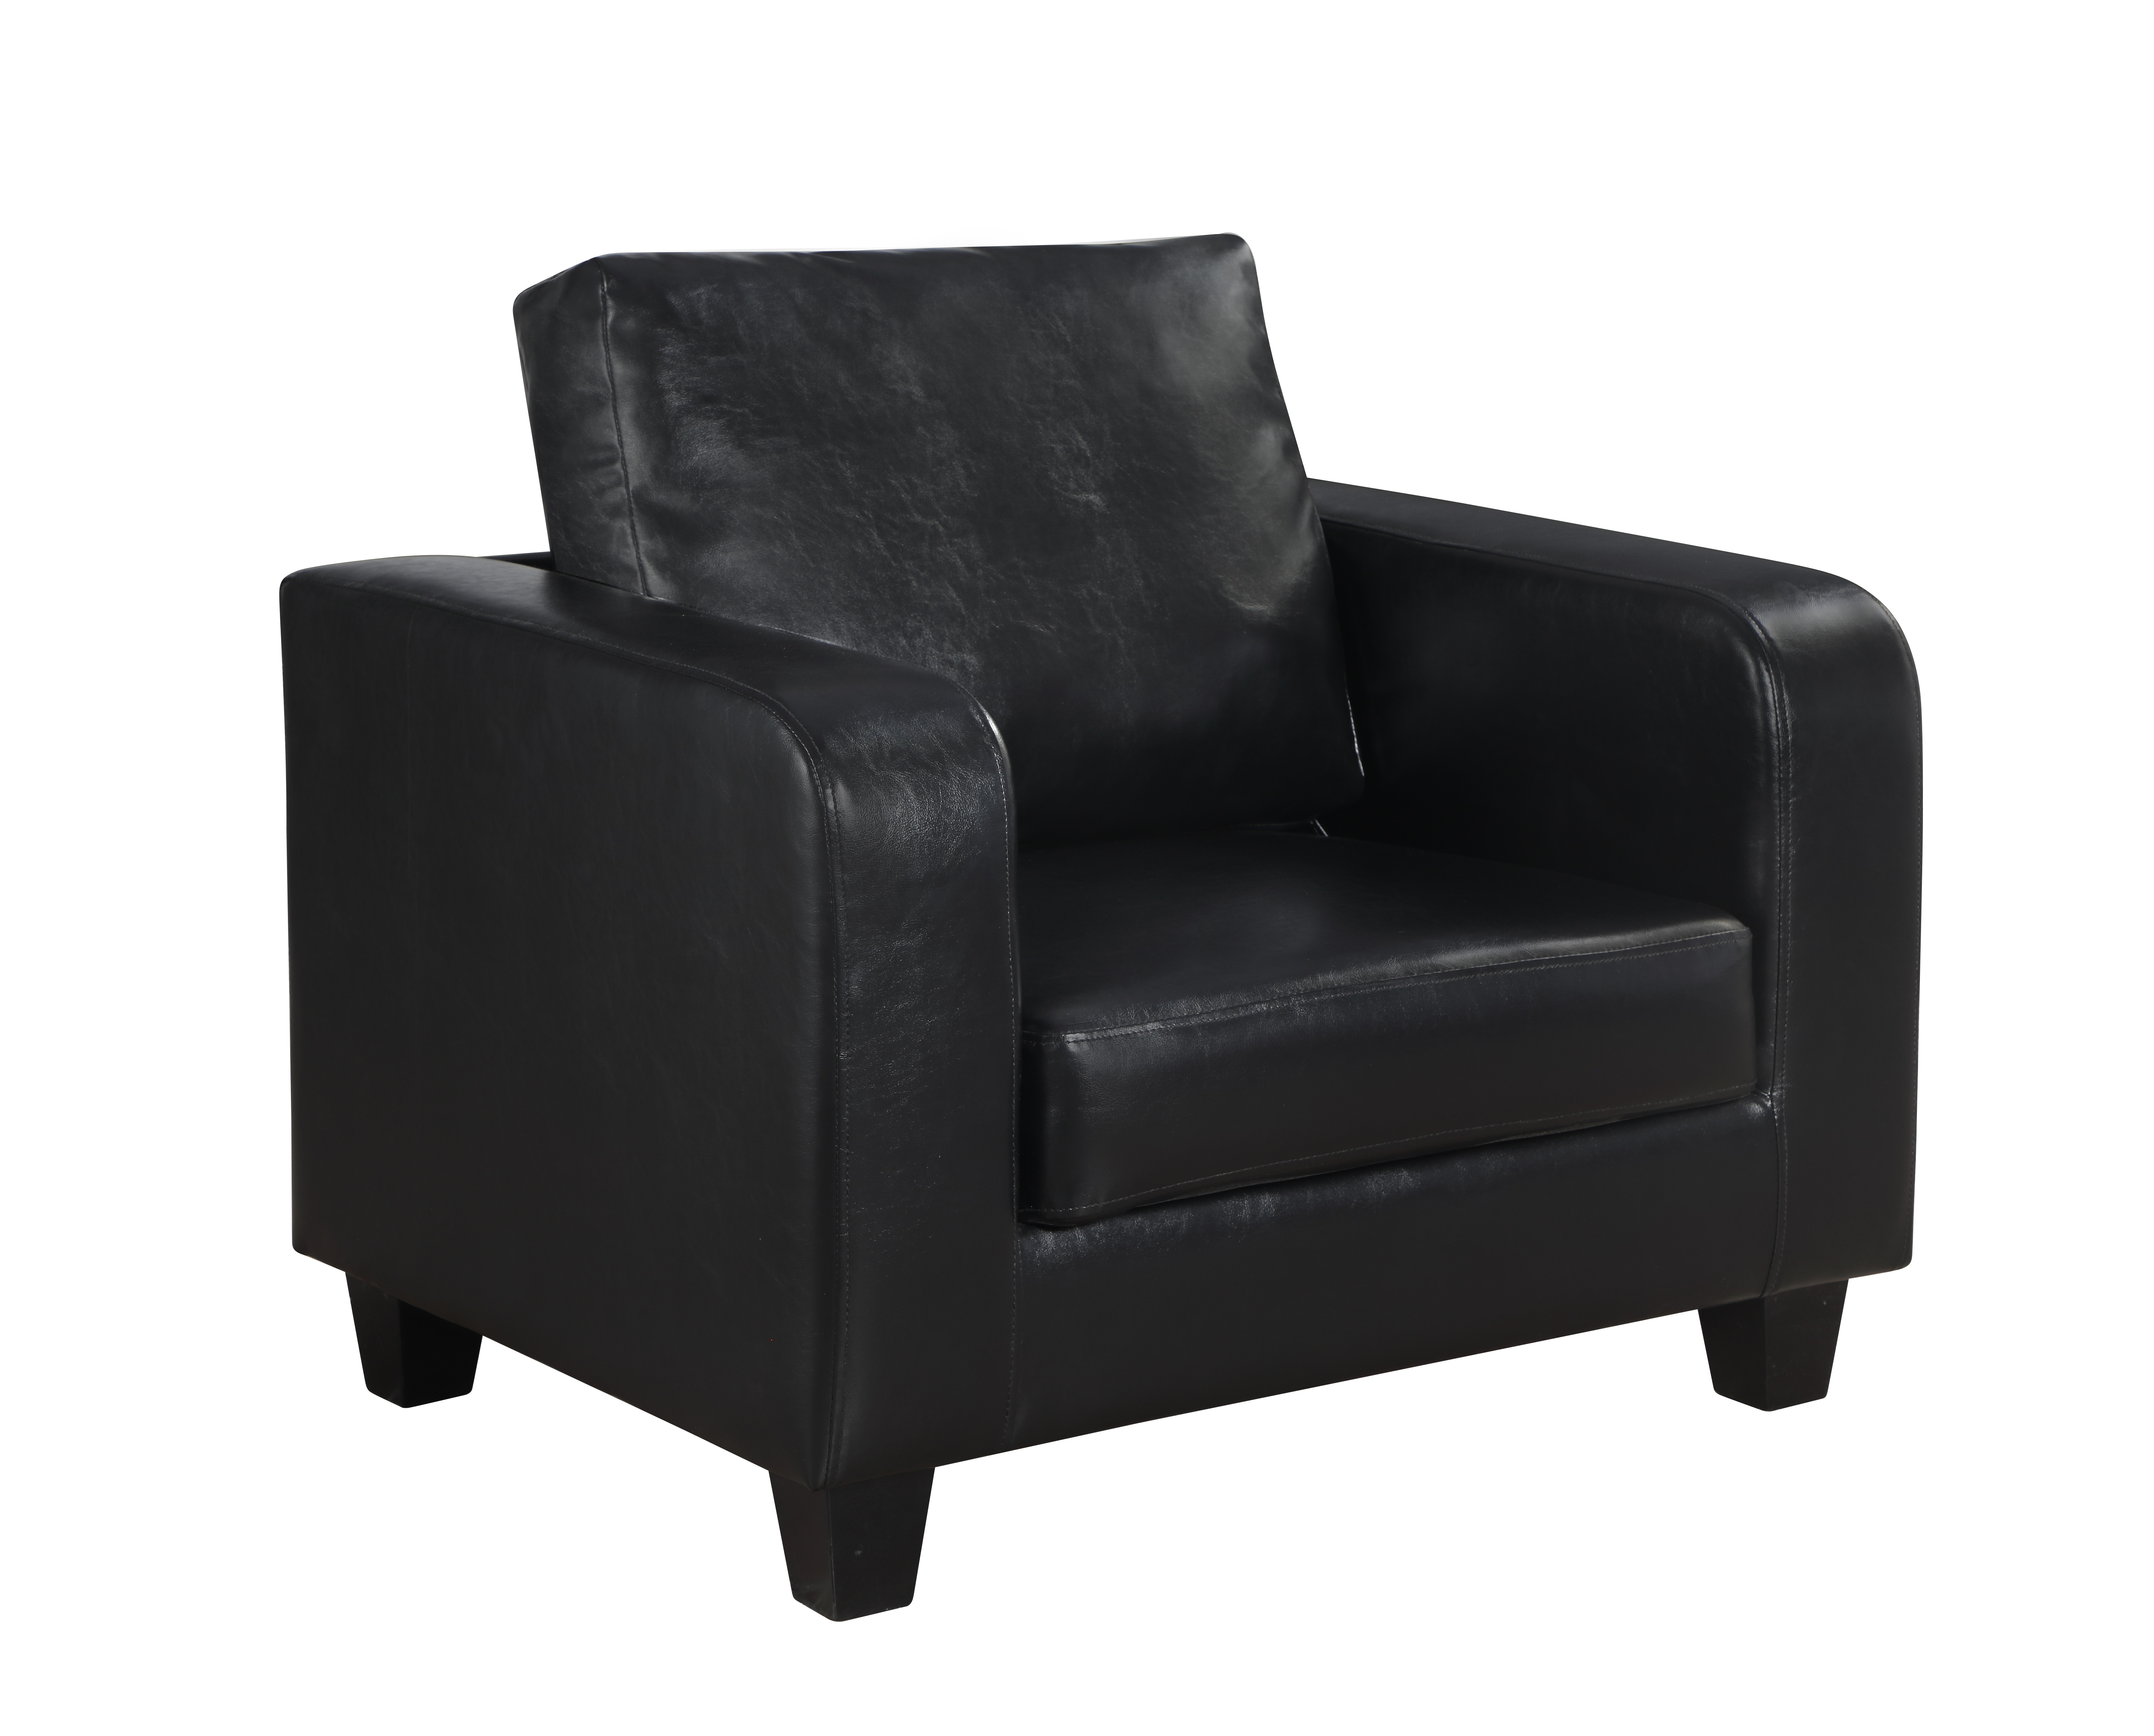 Chair In A Box Black Faux Leather